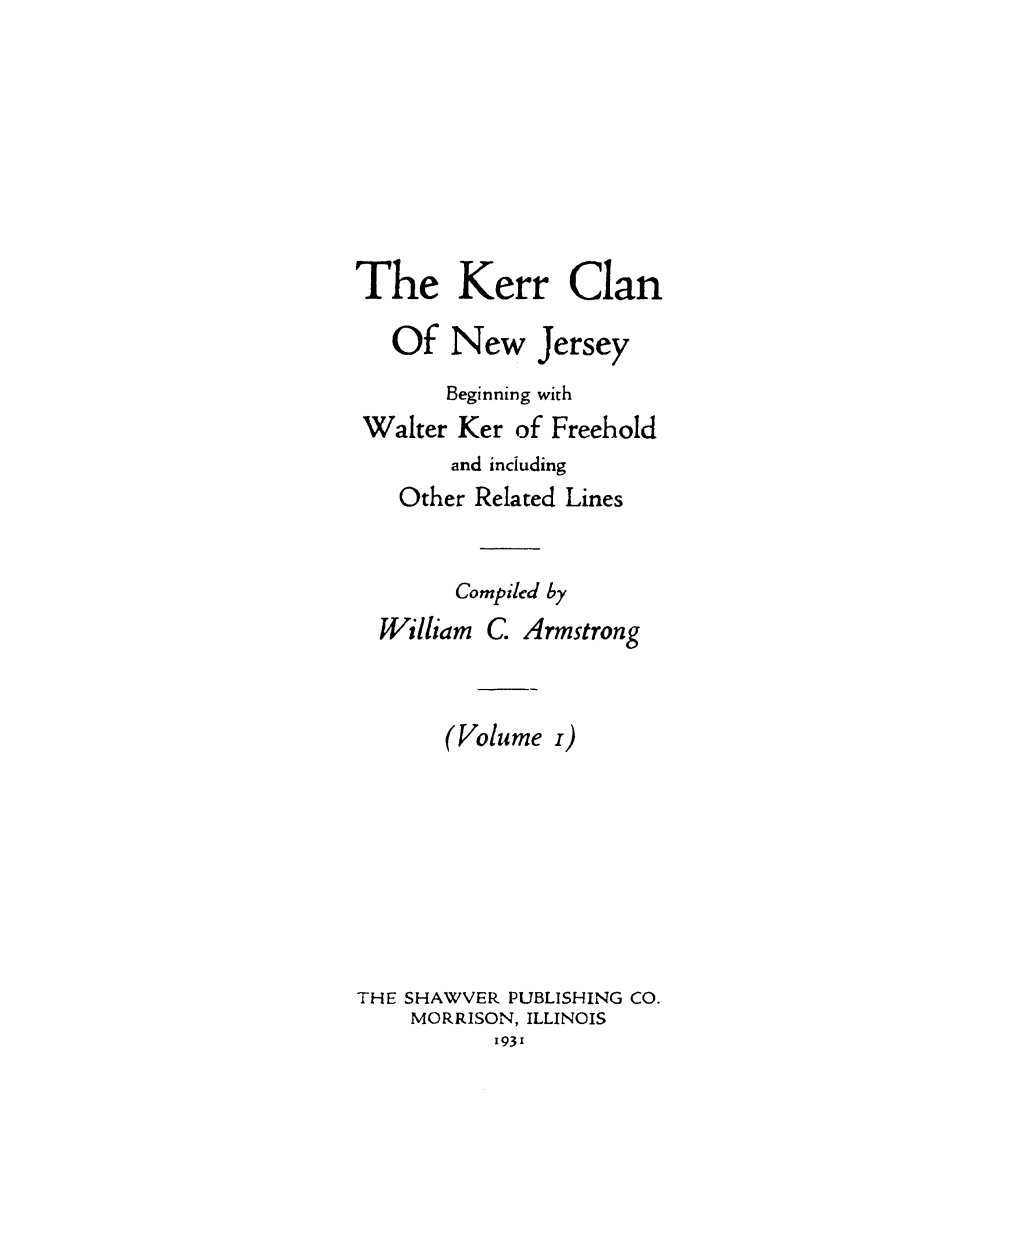 The Kerr Clan of New Jersey